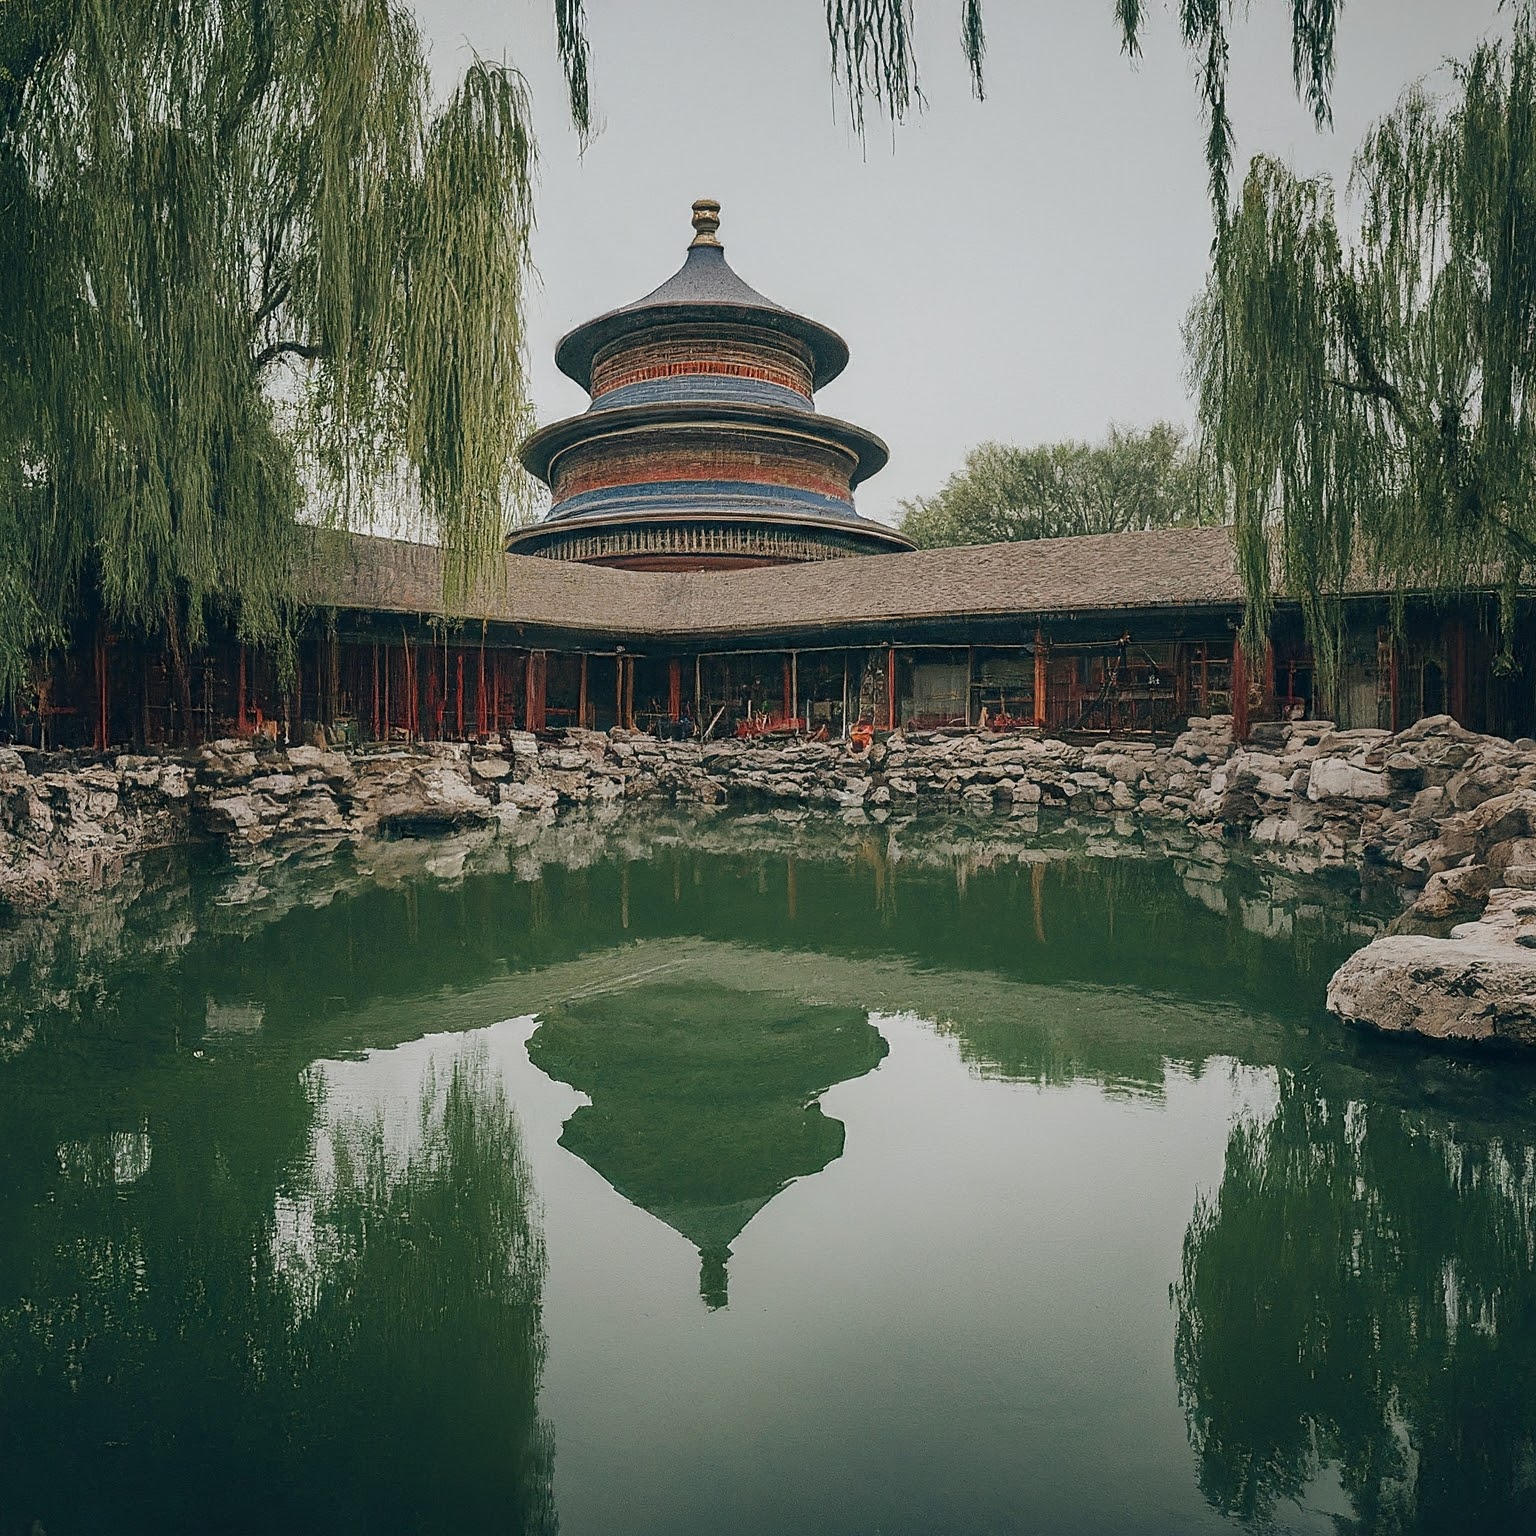 Serene temple garden with pagodas and koi ponds in Beijing, China.